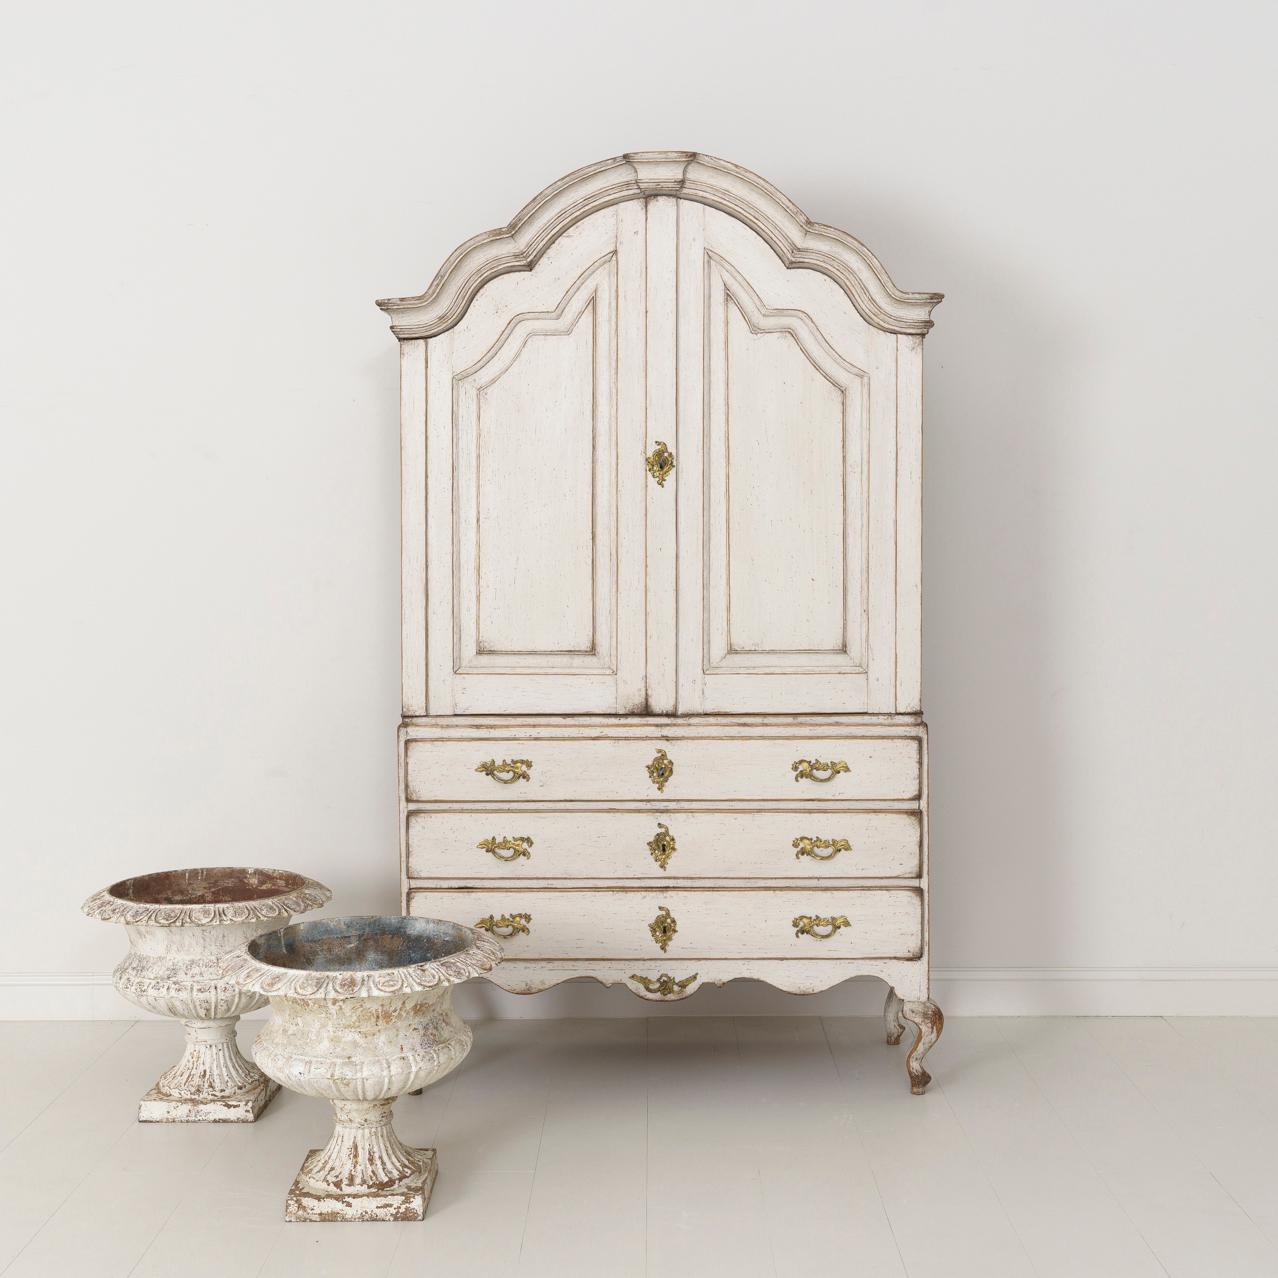 An 18th century two-part Swedish linen press or armoire from the Rococo period with original gilded bronze hardware, locks, and keys. This cabinet is beautifully proportioned with a gracefully arched pediment cornice and curvaceous cabriole legs.